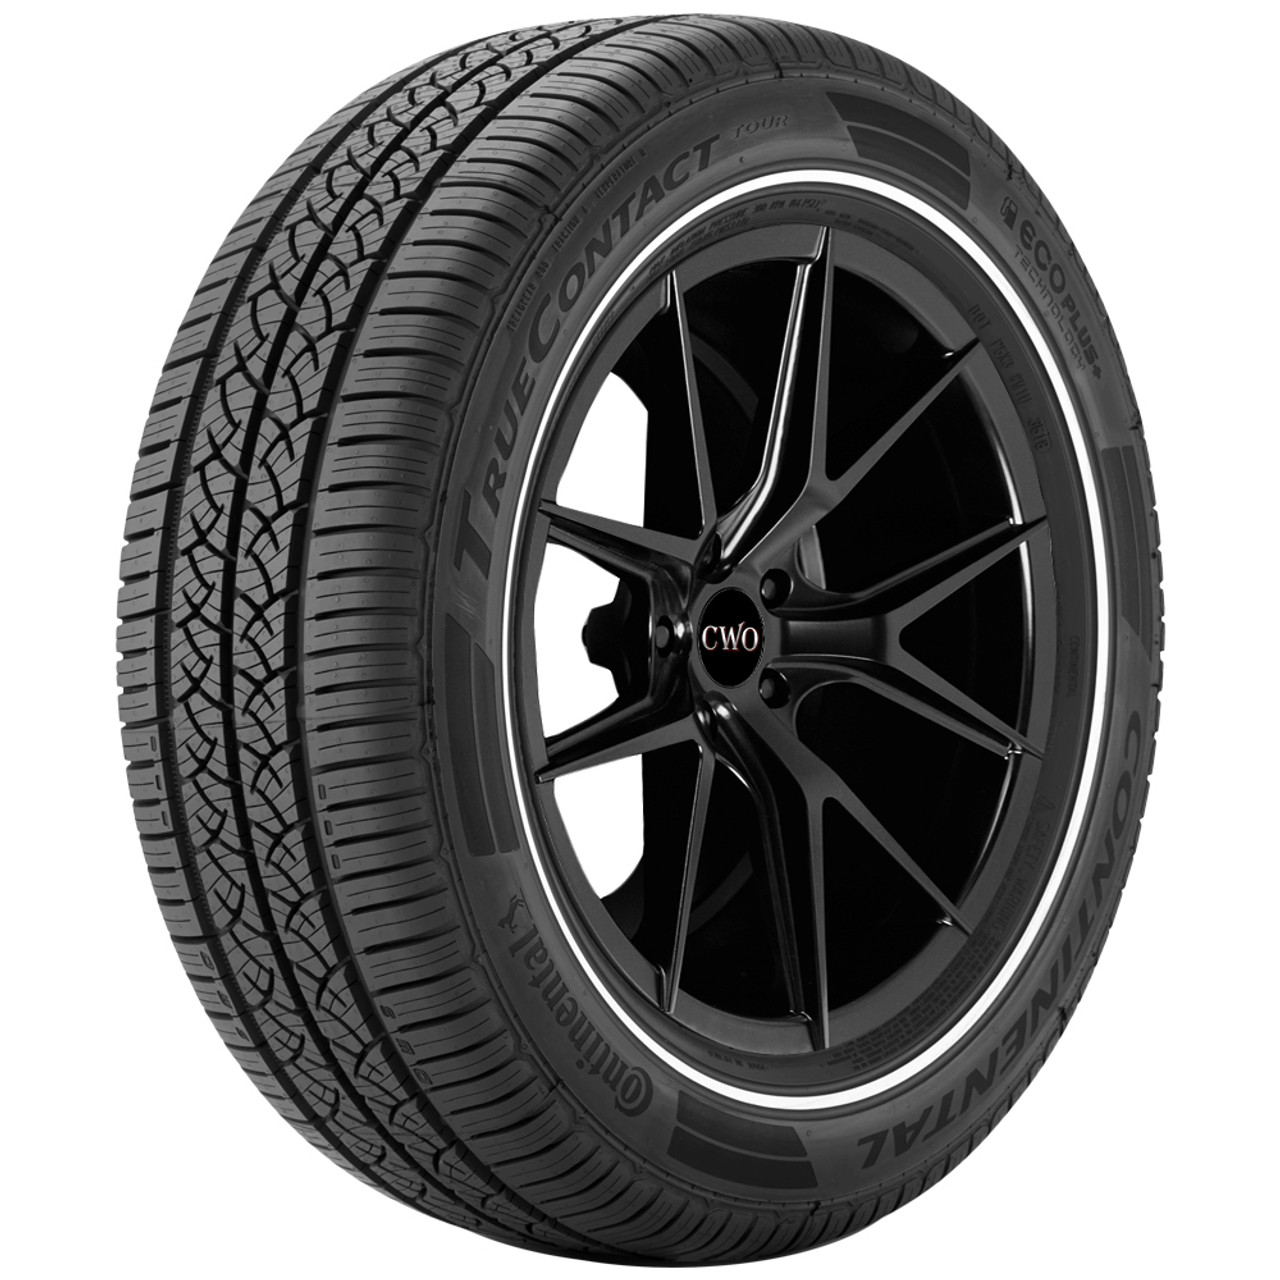 continental-true-contact-tour-tire-225-60r16-15570550000